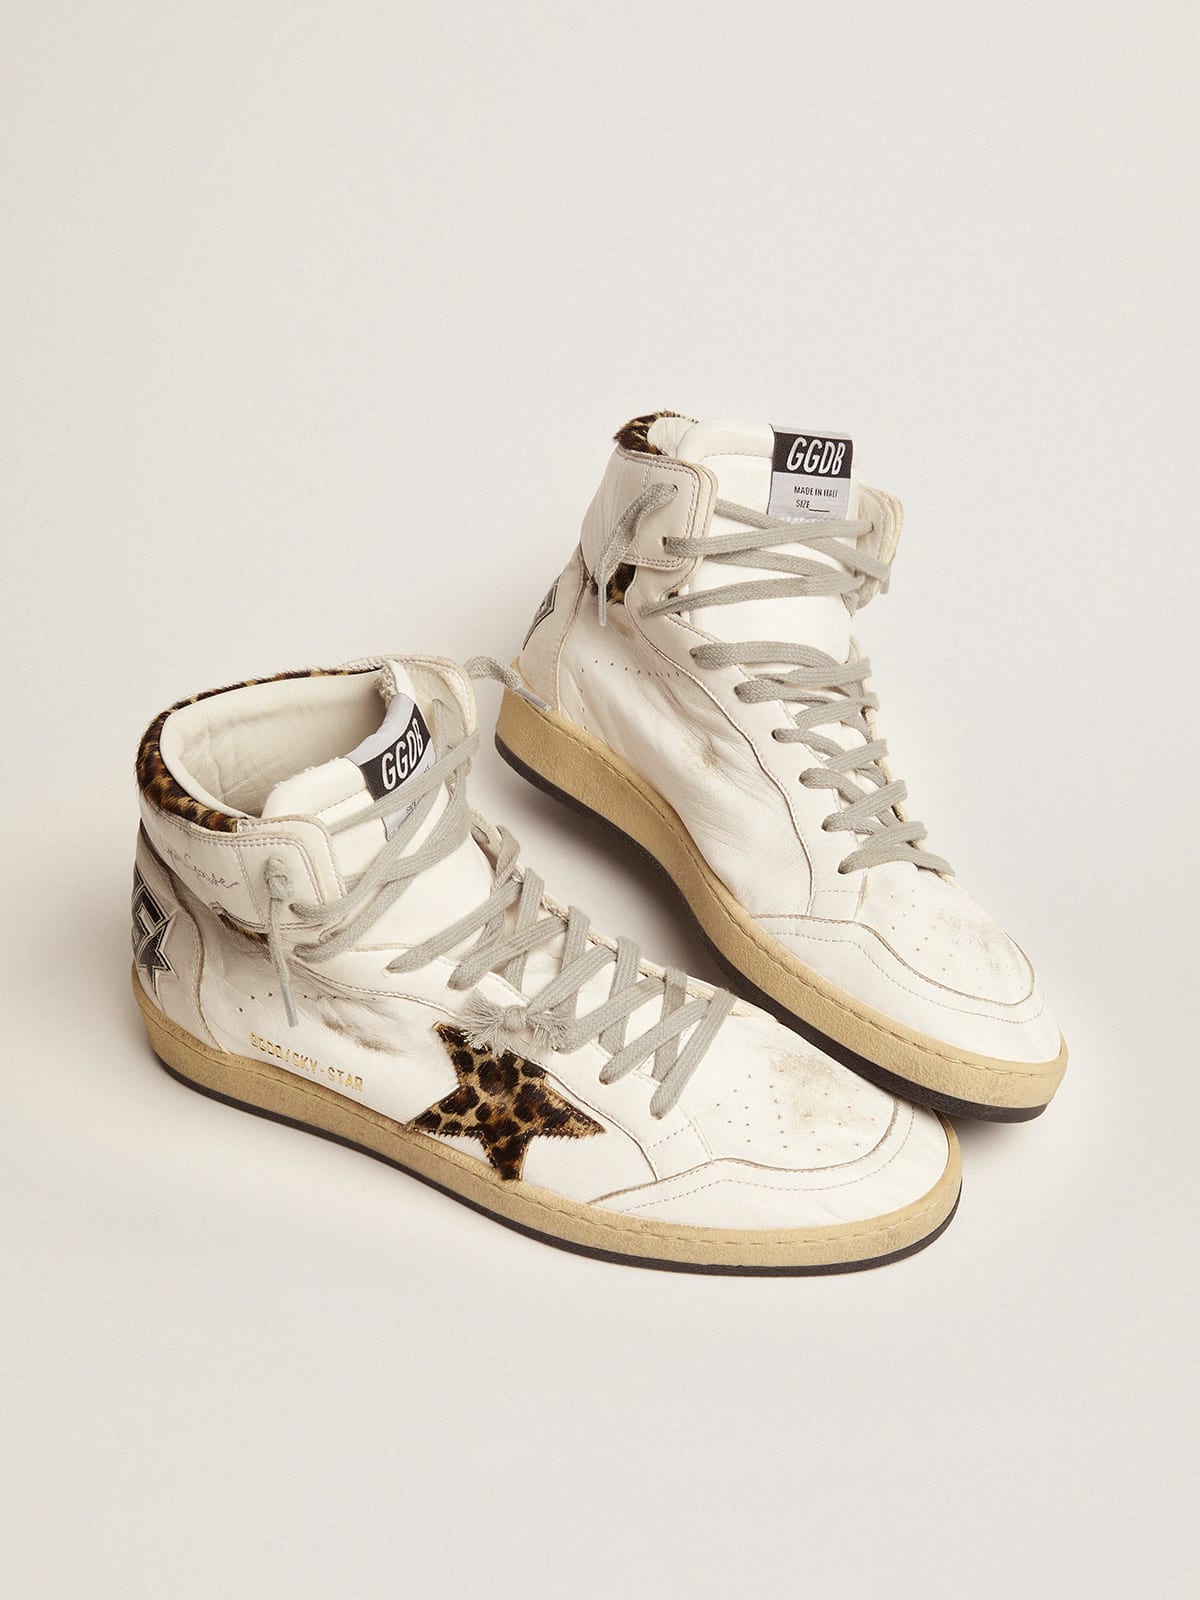 Golden Goose - Sky-Star sneakers with signature on the ankle and leopard-print pony skin inserts in 